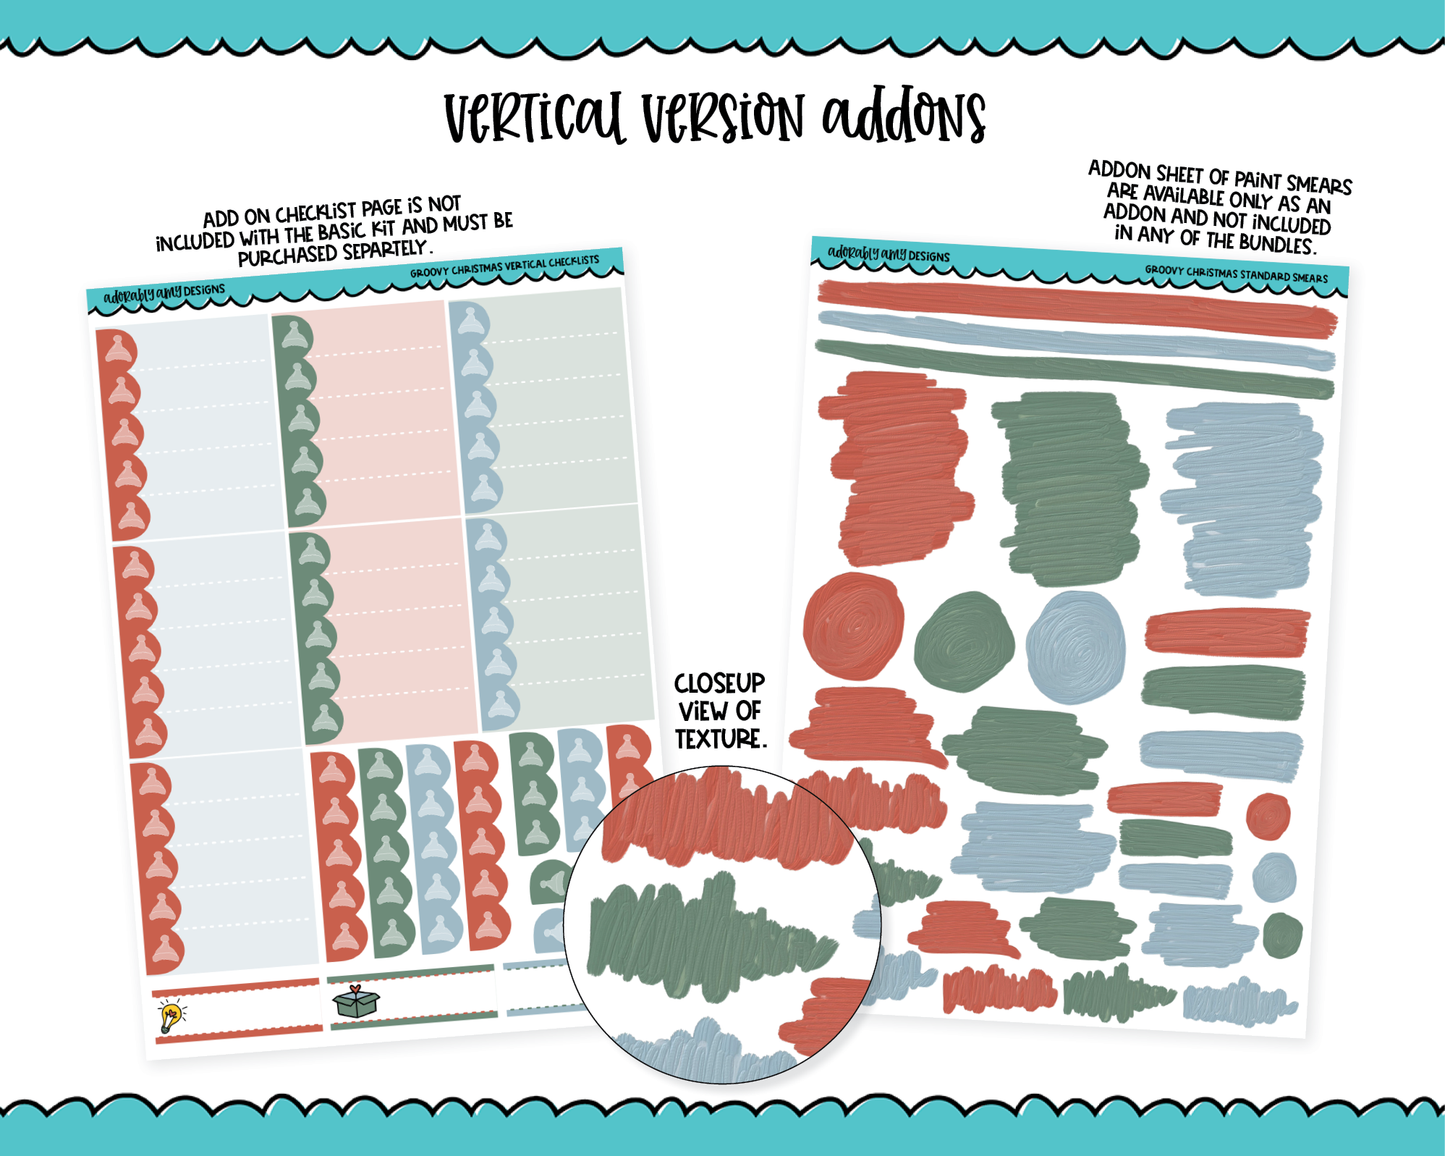 Vertical Groovy Christmas Holidays and Christmas Themed Planner Sticker Kit for Vertical Standard Size Planners or Inserts